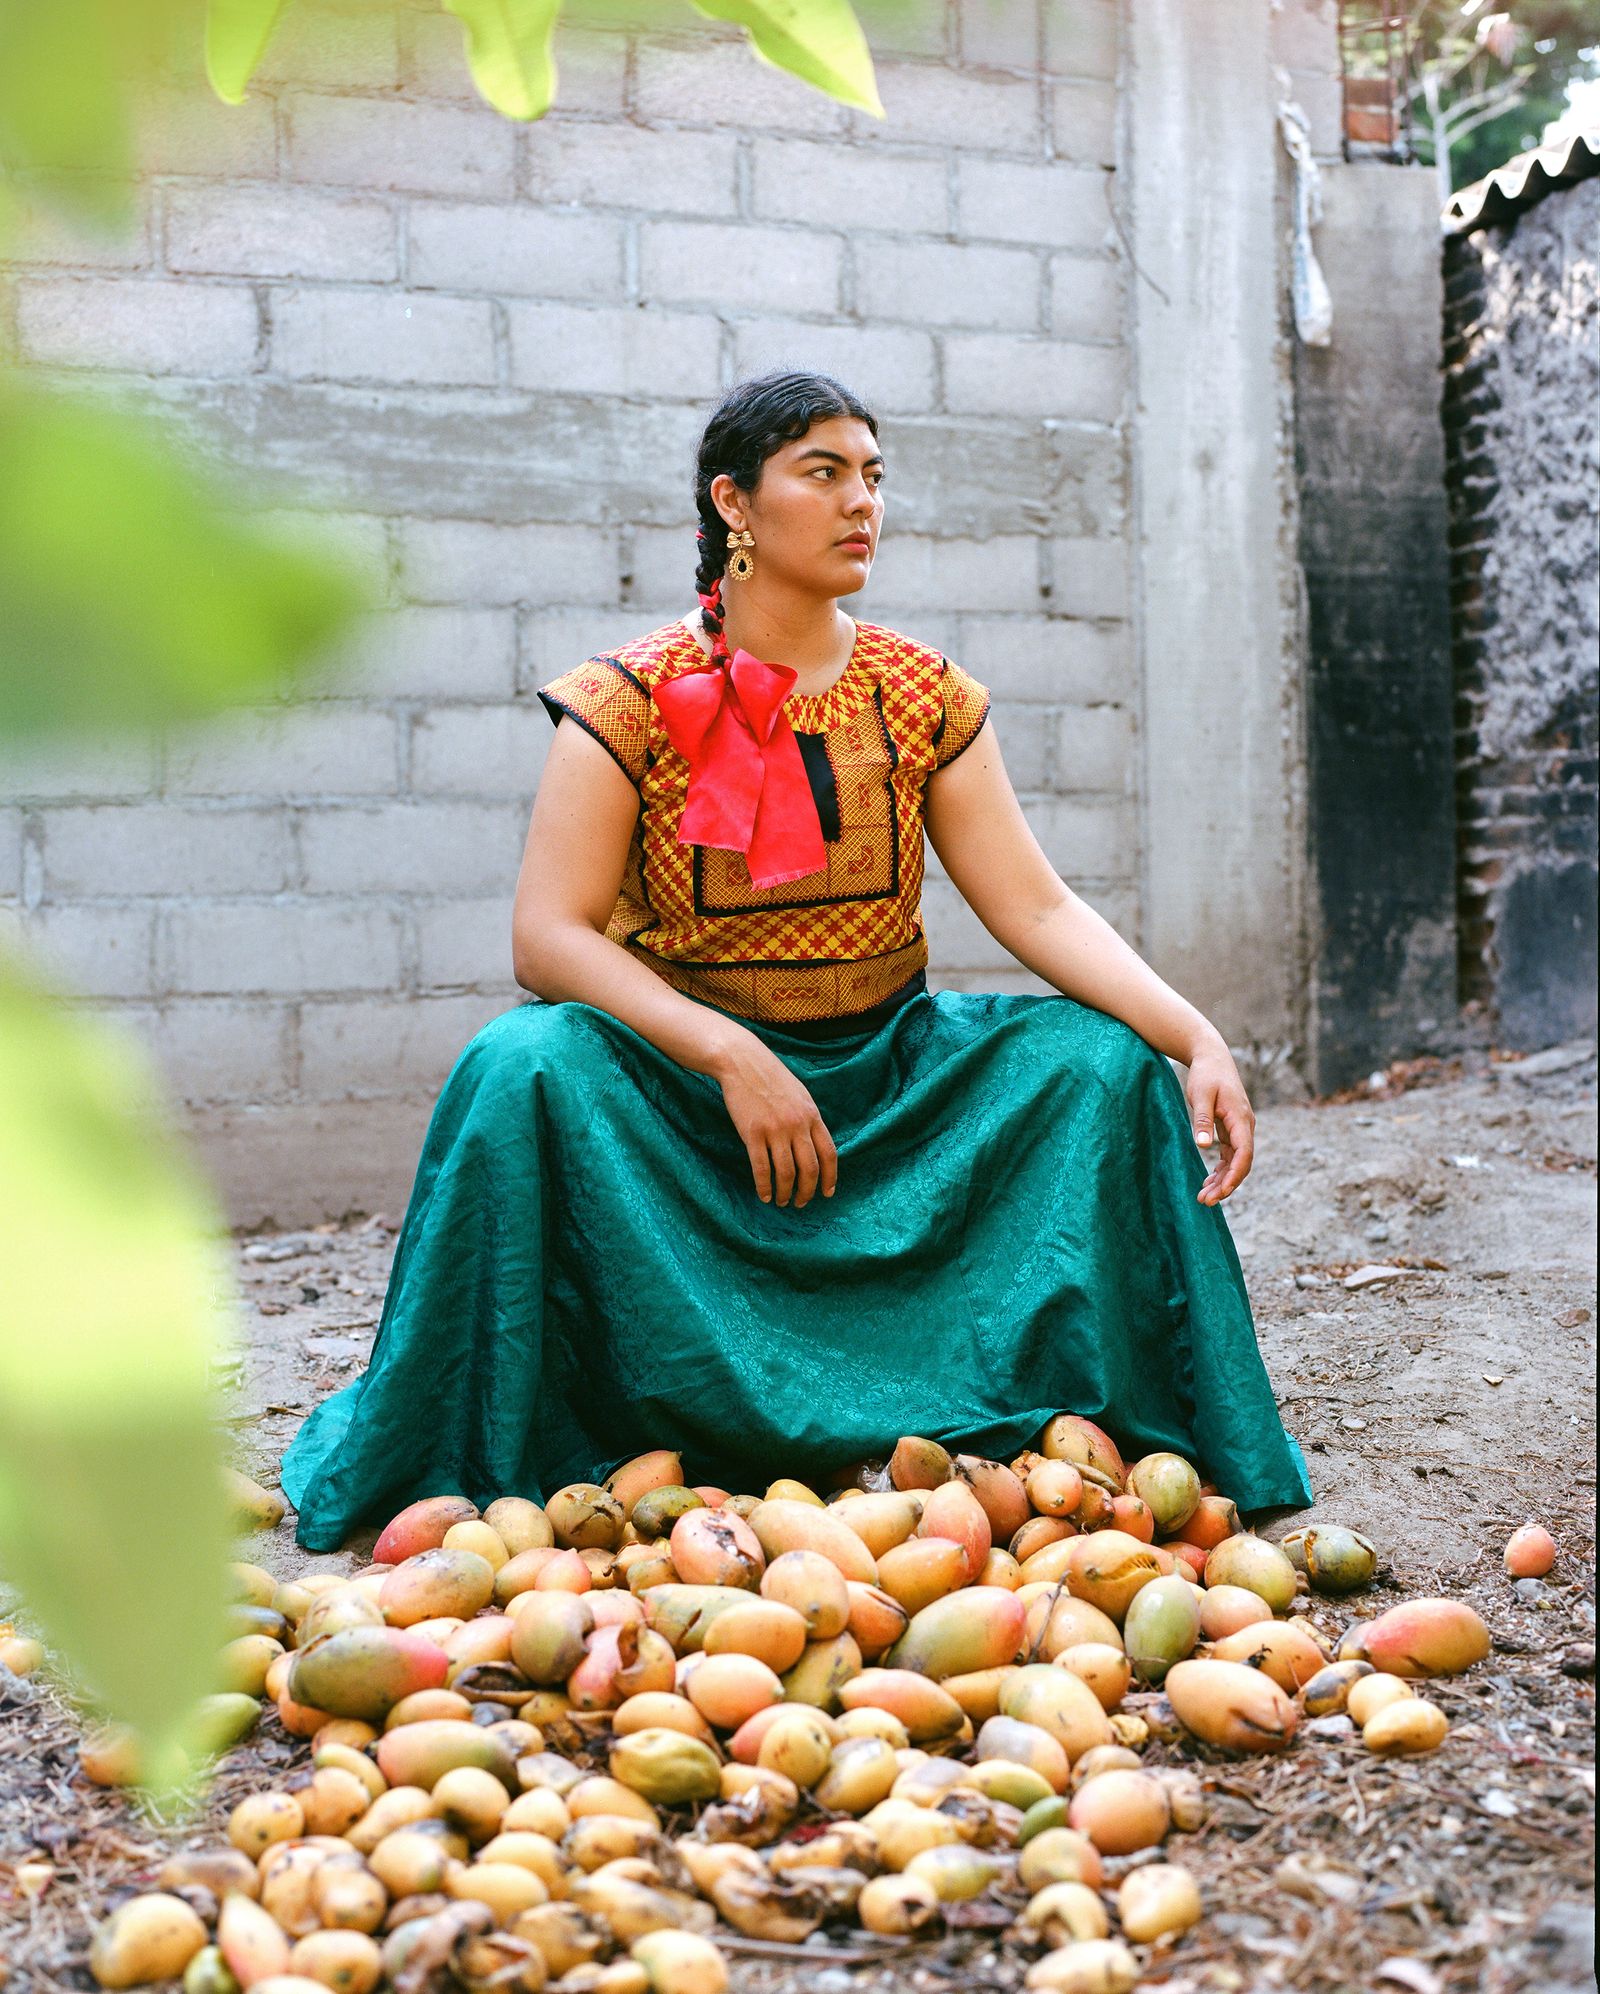 © Jahel Guerra - Abril wears a meaningful garment from her family, it mango season when we met.